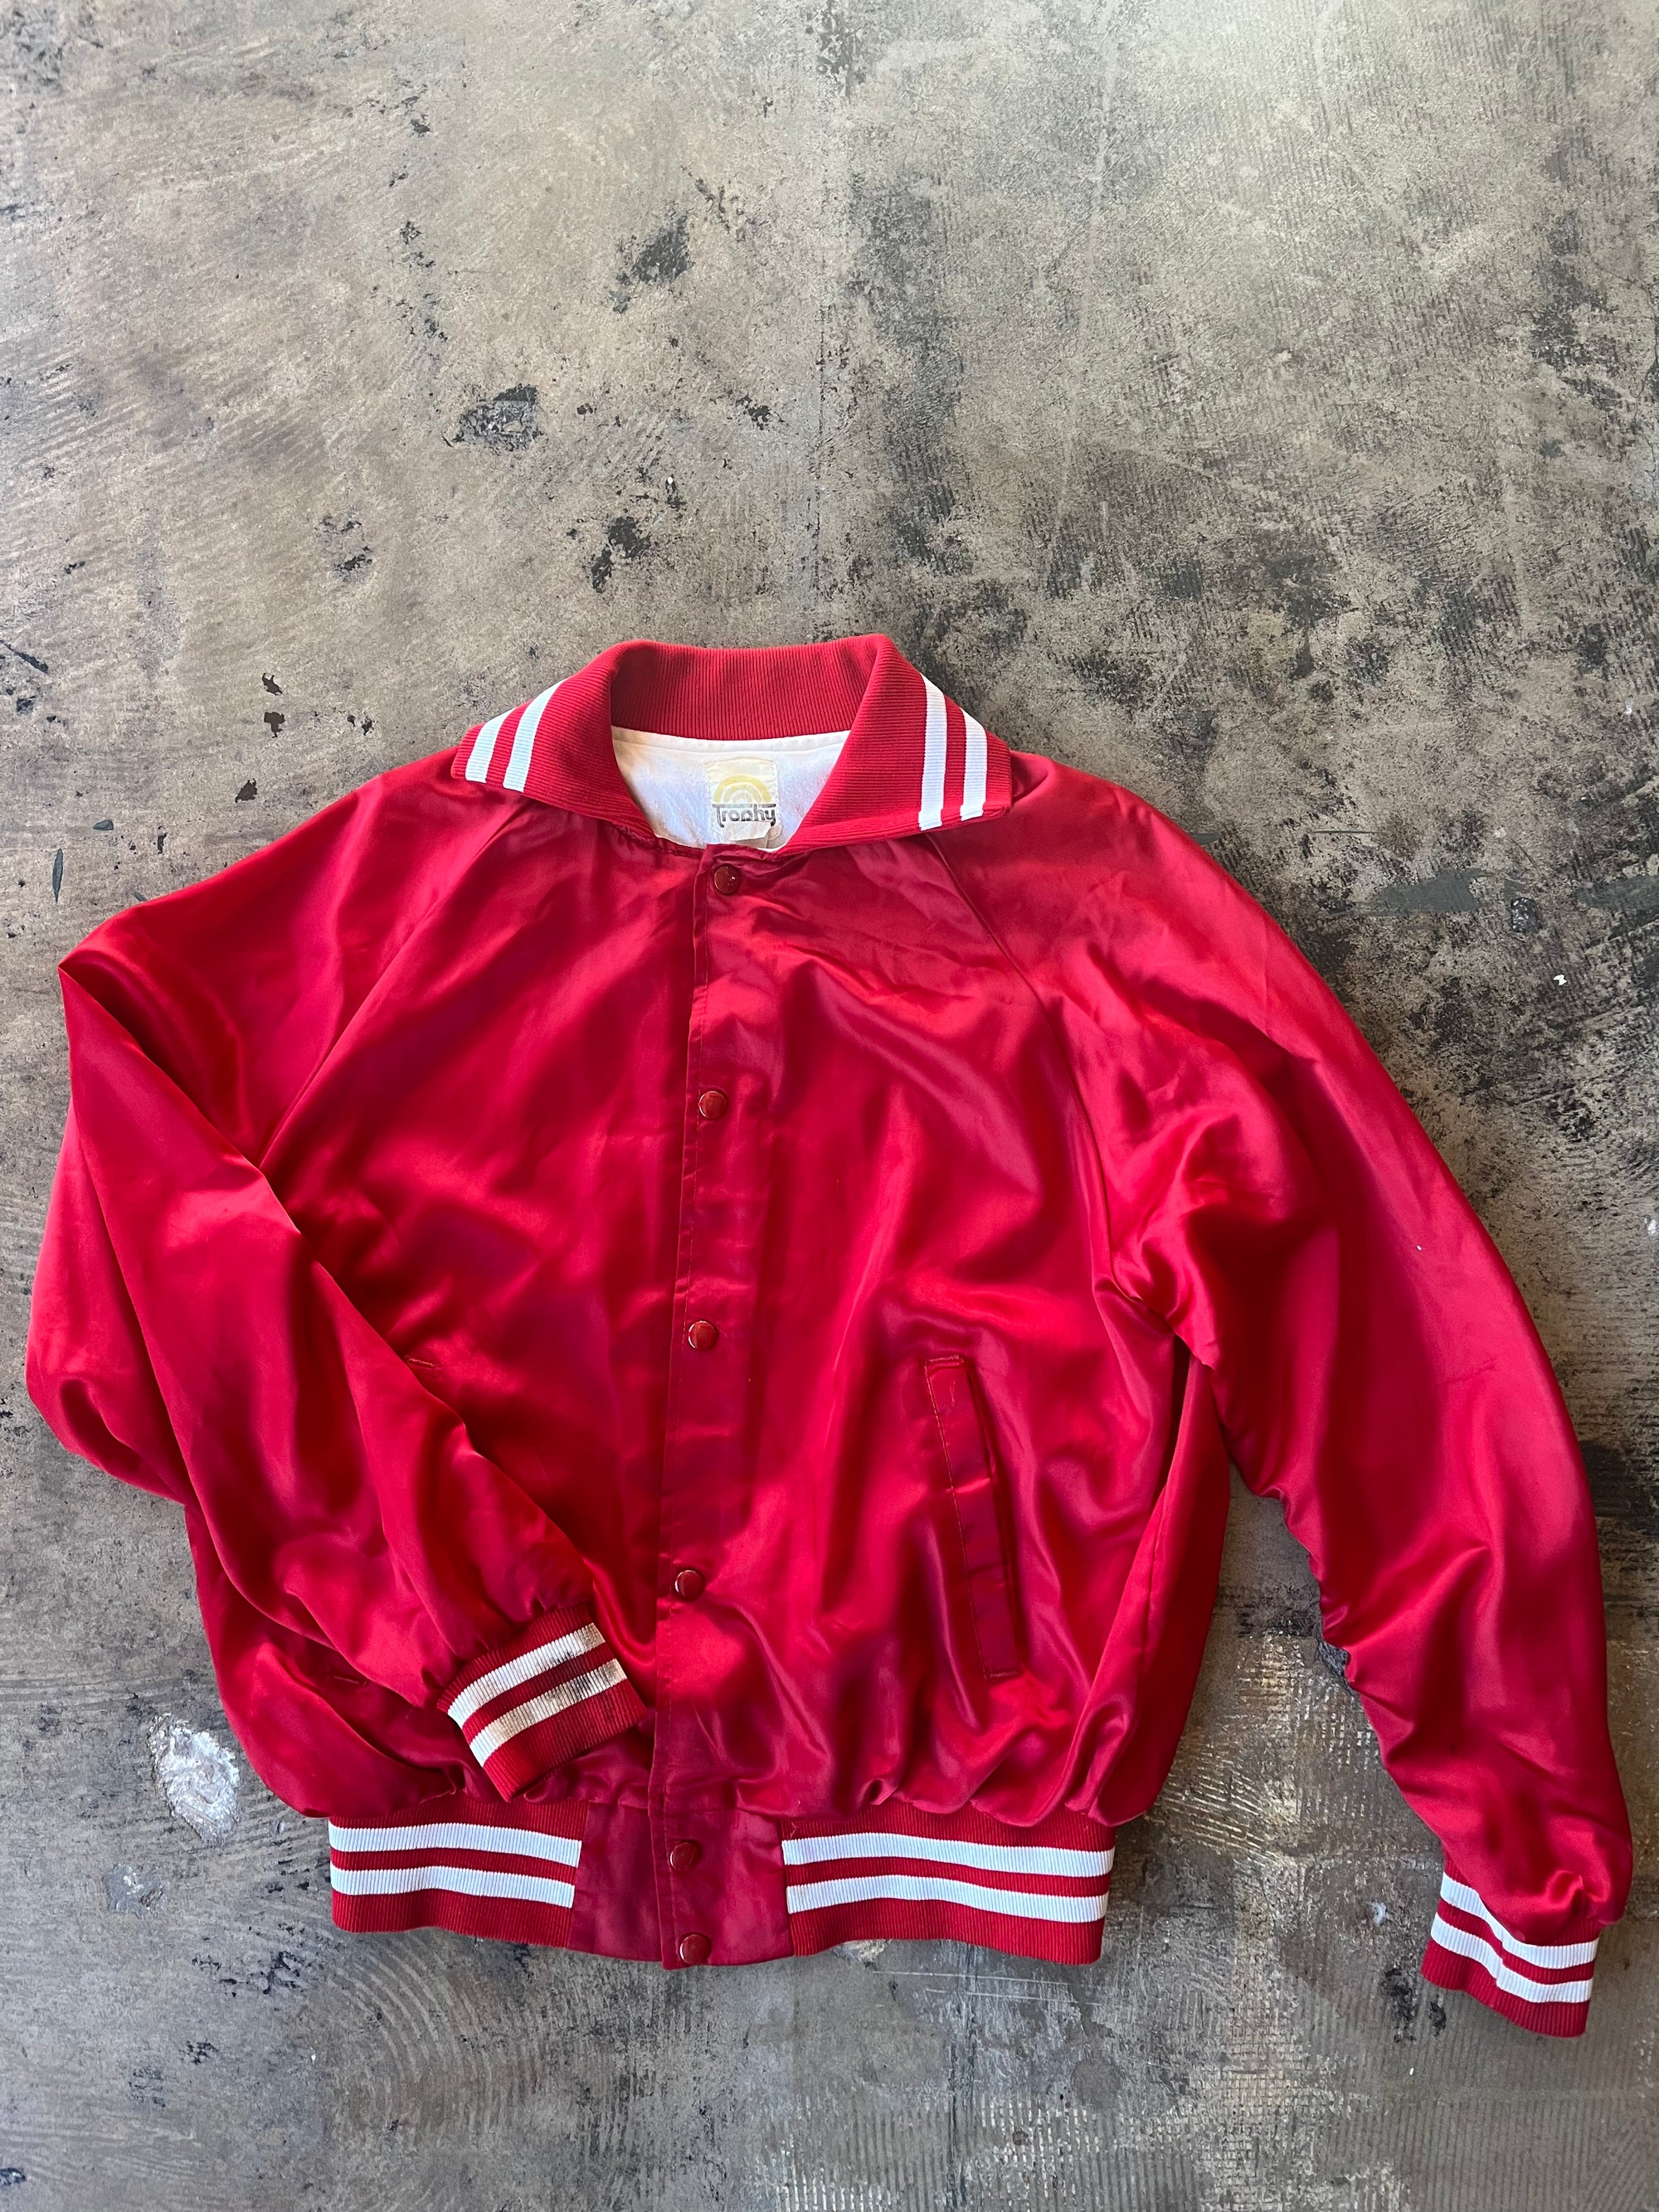 1984 East, Texas Horse Show Red Silk Bomber